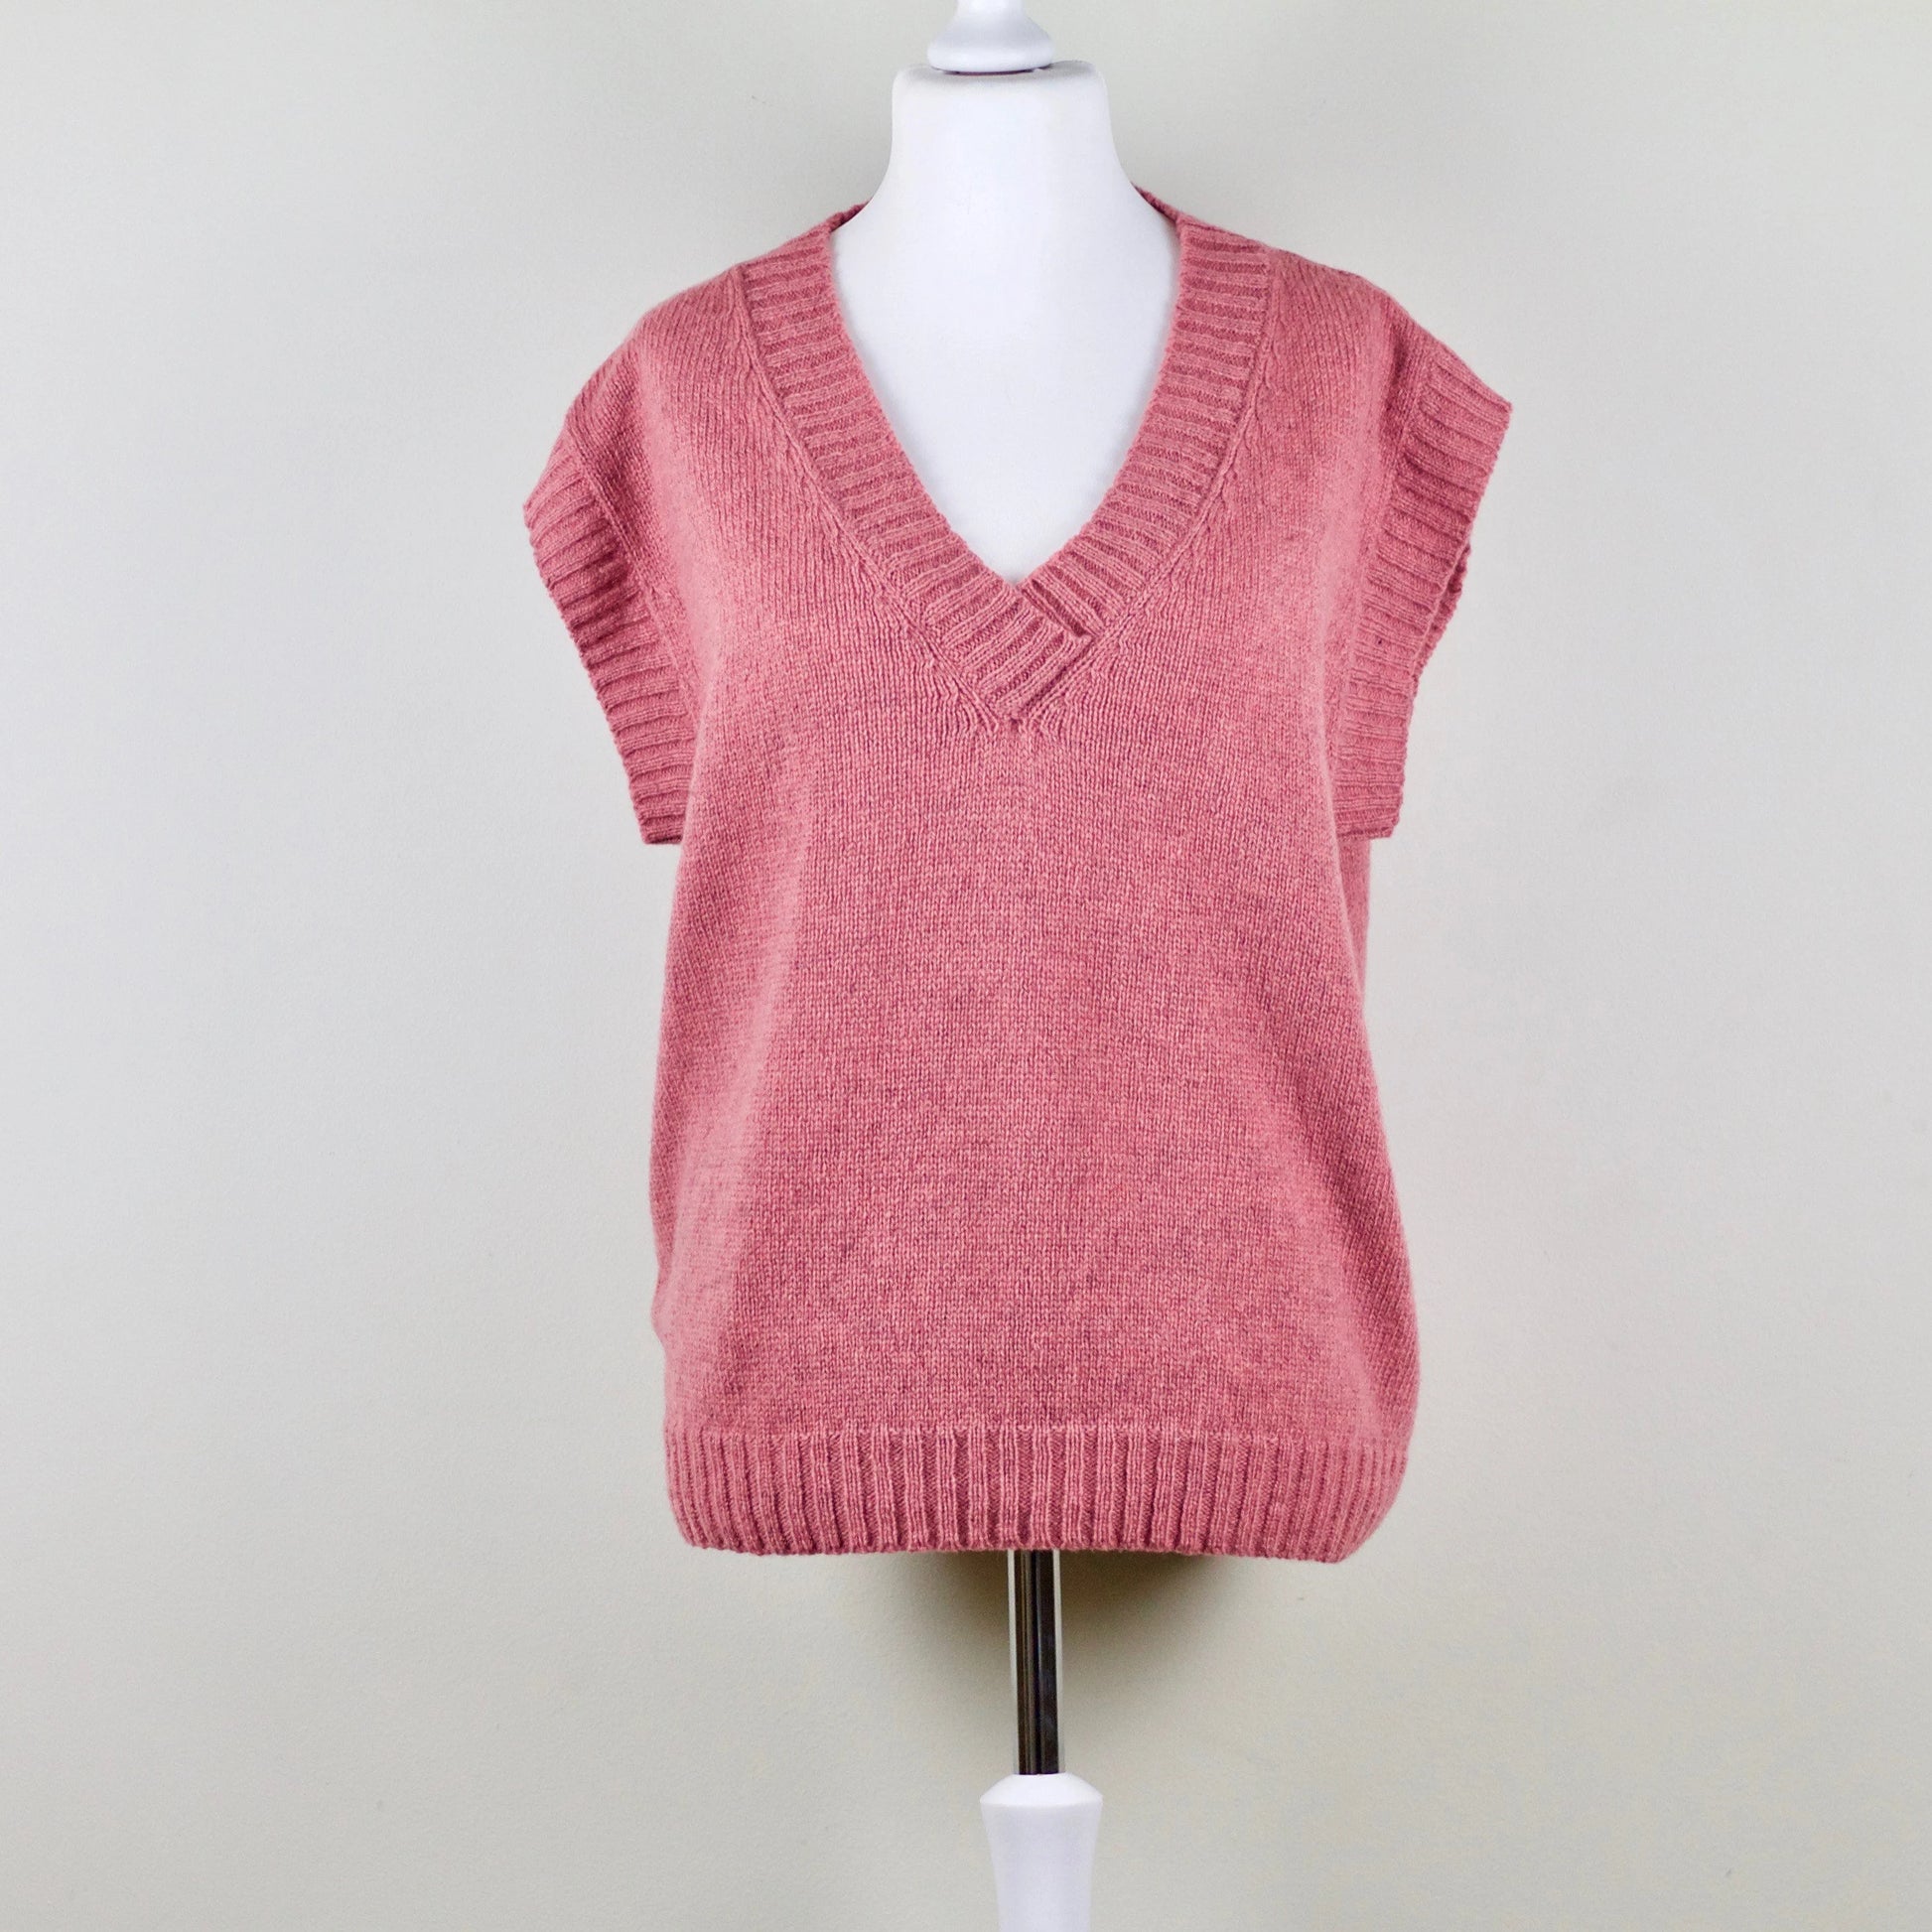 Fashion Wool Knitted Sweater Vest Sleeveless Pullover Knitwear